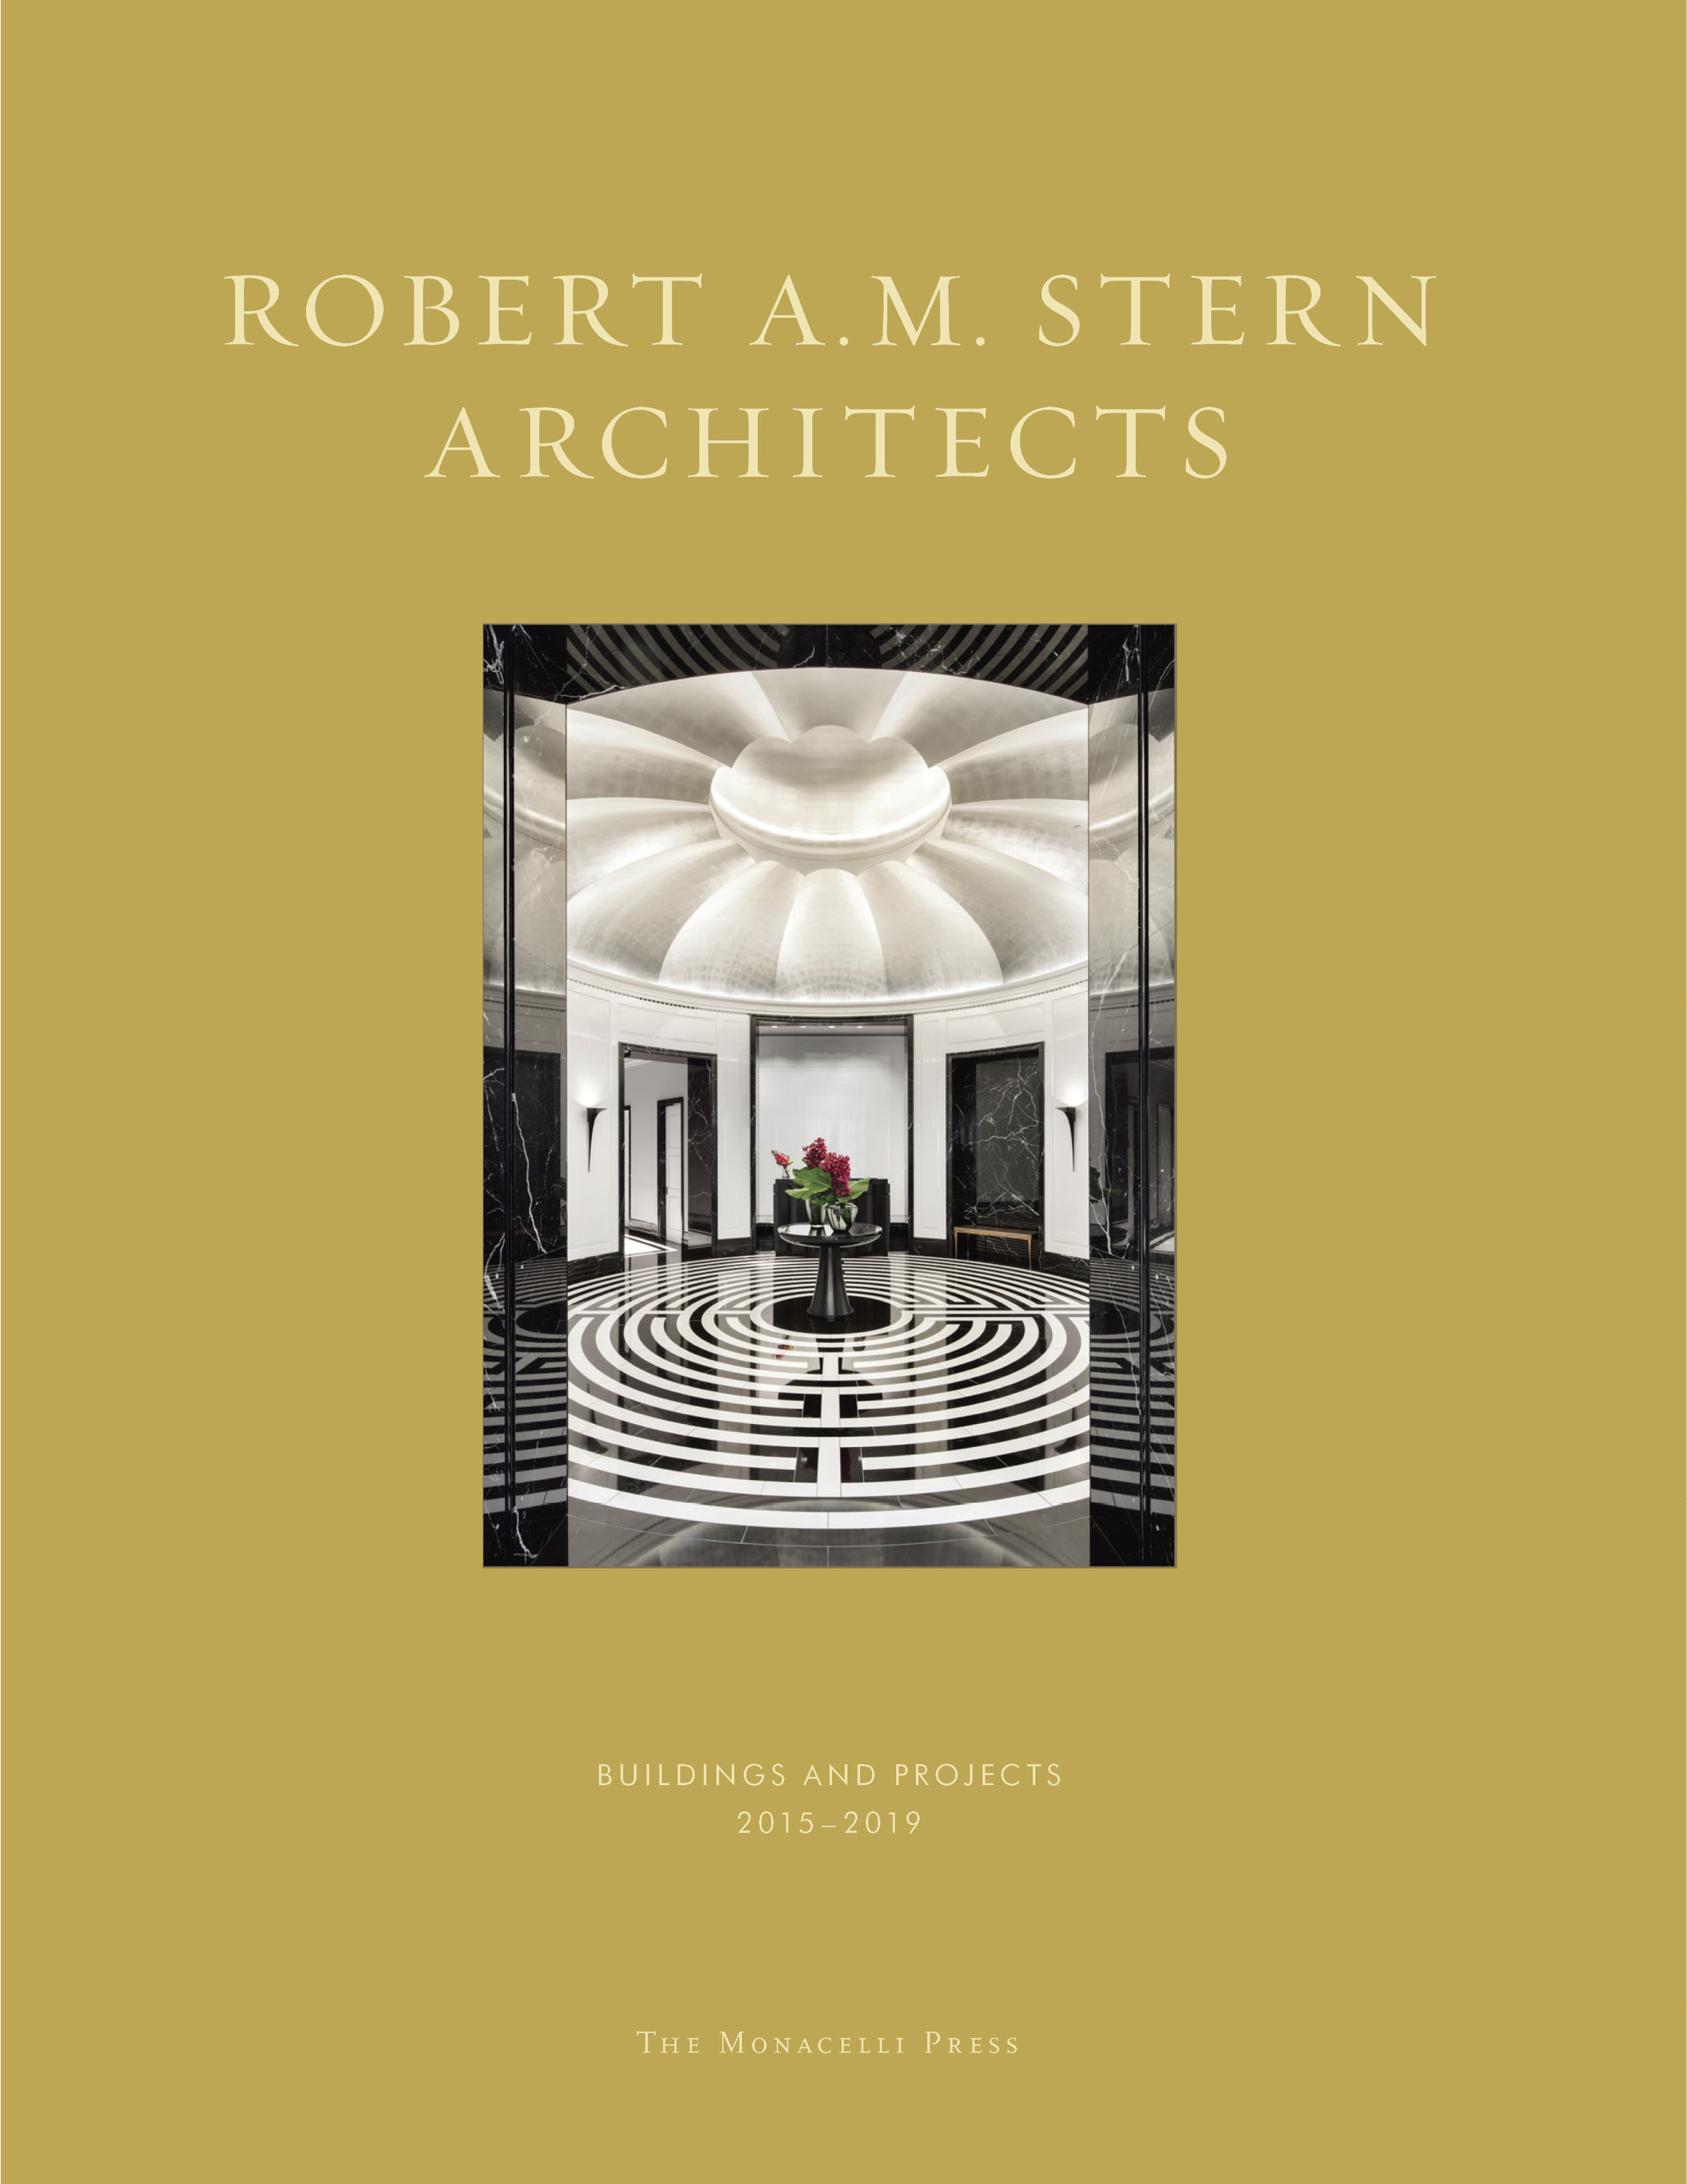 Robert A.M. Stern Architects: Buildings and Projects 2015 - 2019